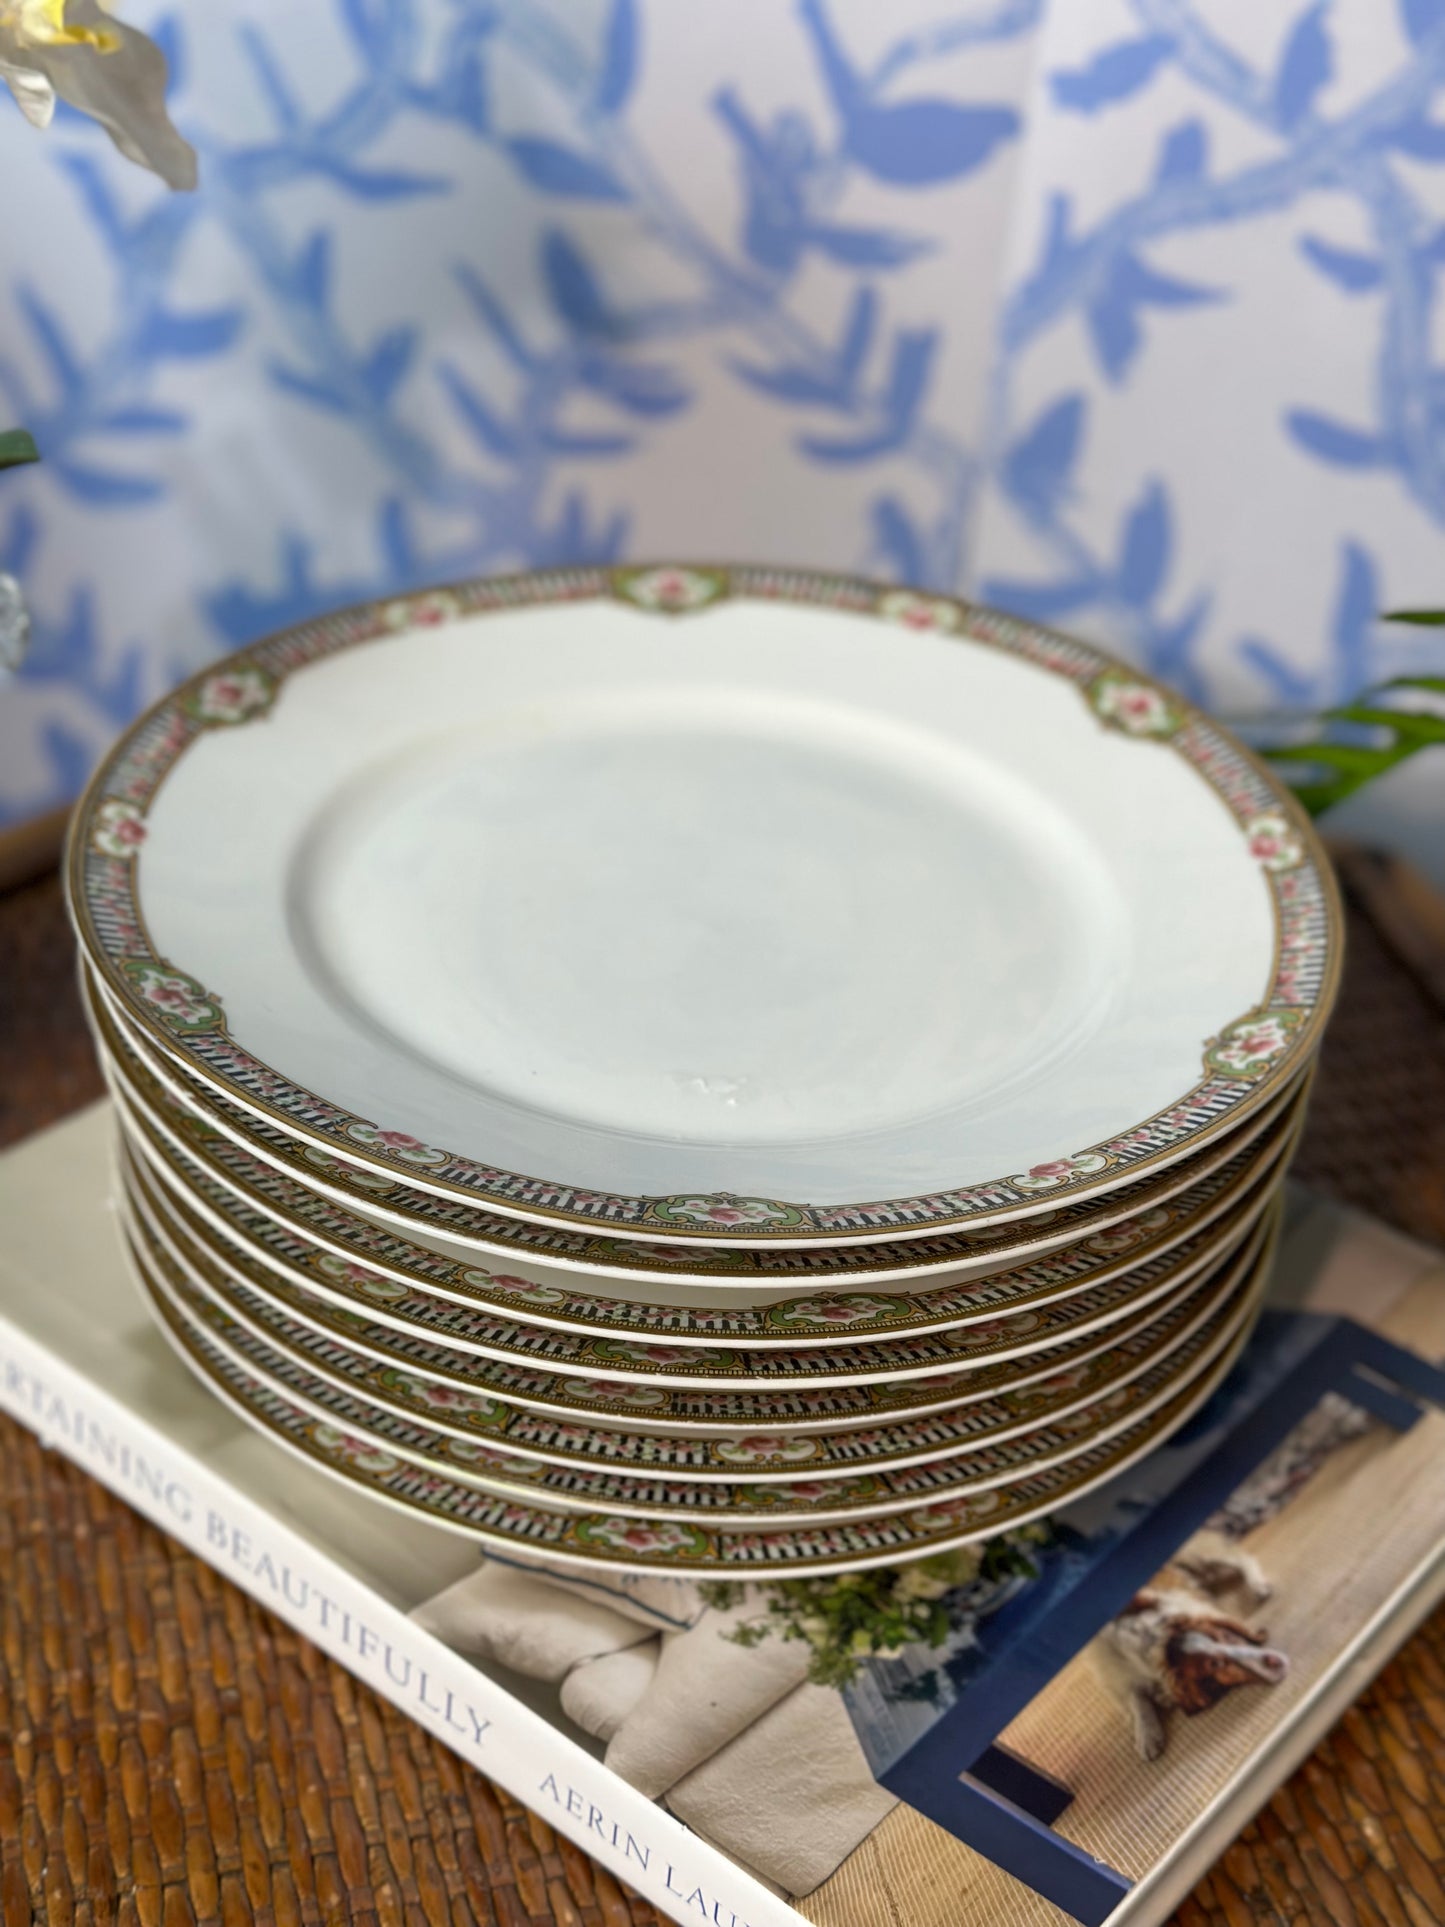 WCC COLLECTION - Antique Theodore Haviland France, Limoges Plate Set (8) - Pristine! WCC COLLECTION